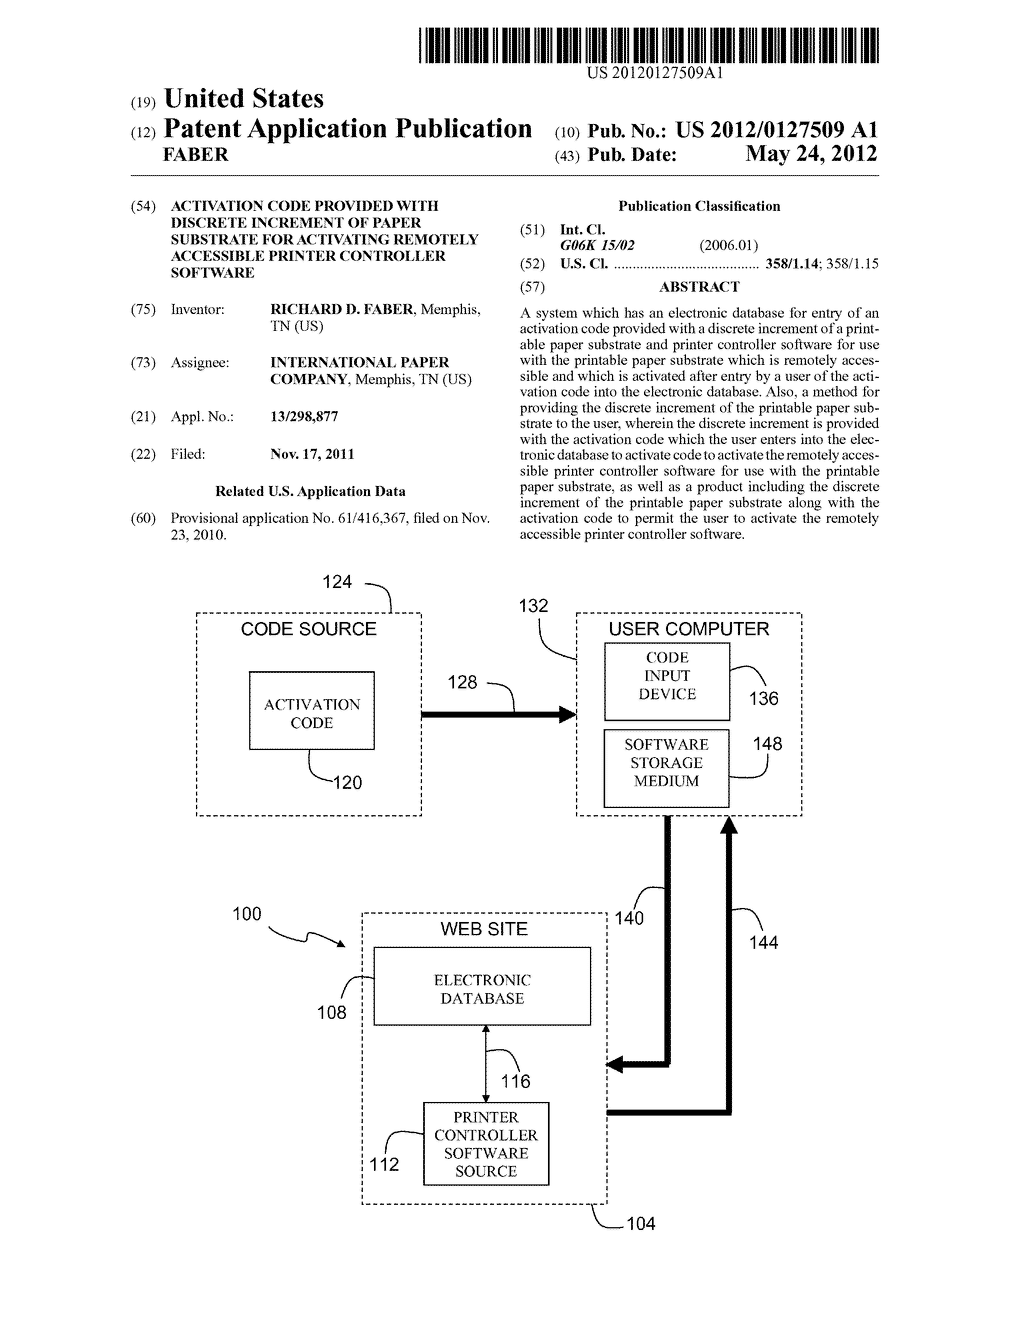 Activation Code Provided with Discrete Increment of Paper Substrate for     Activating Remotely Accessible Printer Controller Software - diagram, schematic, and image 01